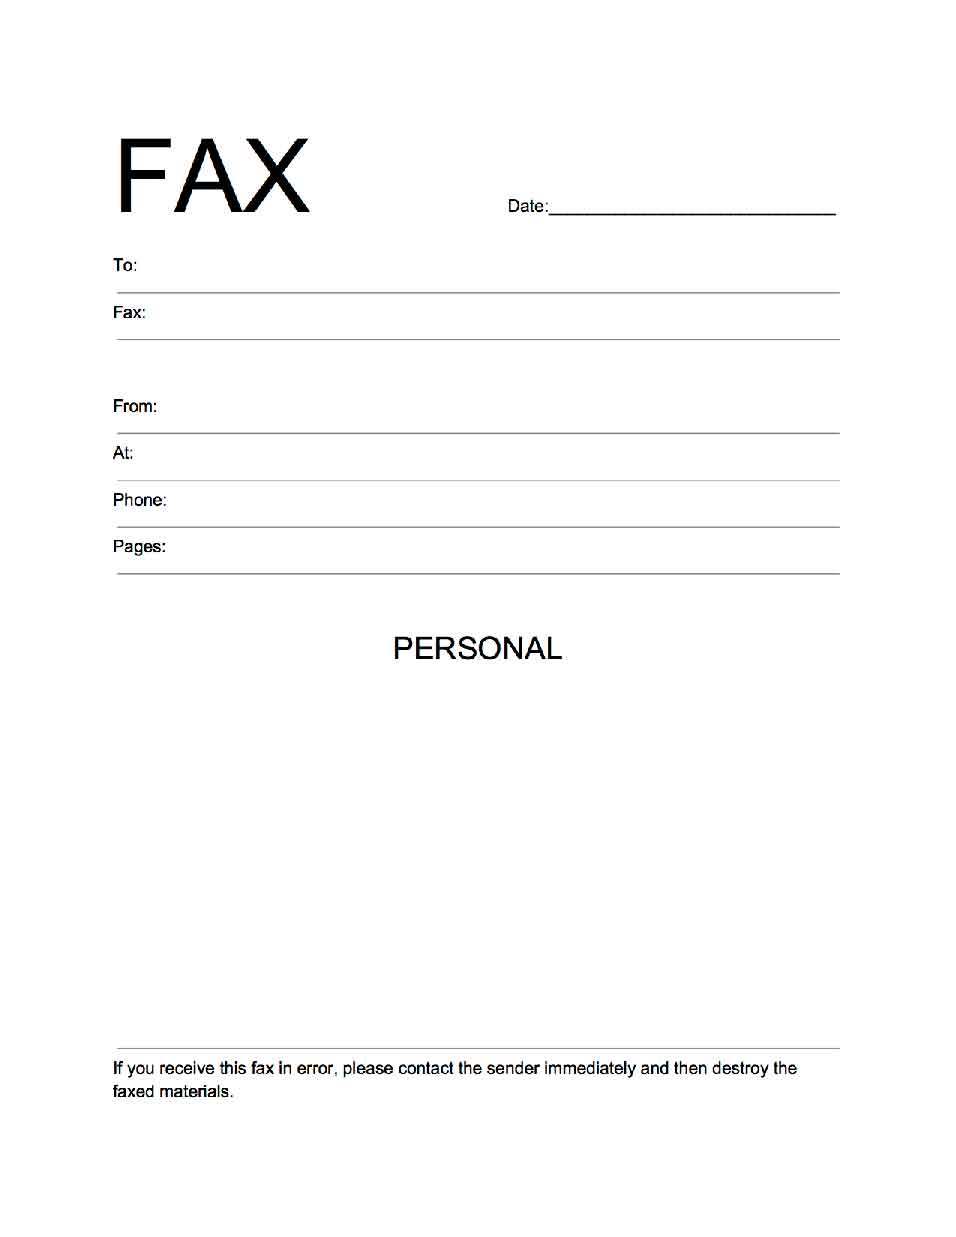 Fax cover sheet Word Archives - [Free]^^ Fax Cover Sheet Template Inside Fax Cover Sheet Template Word 2010